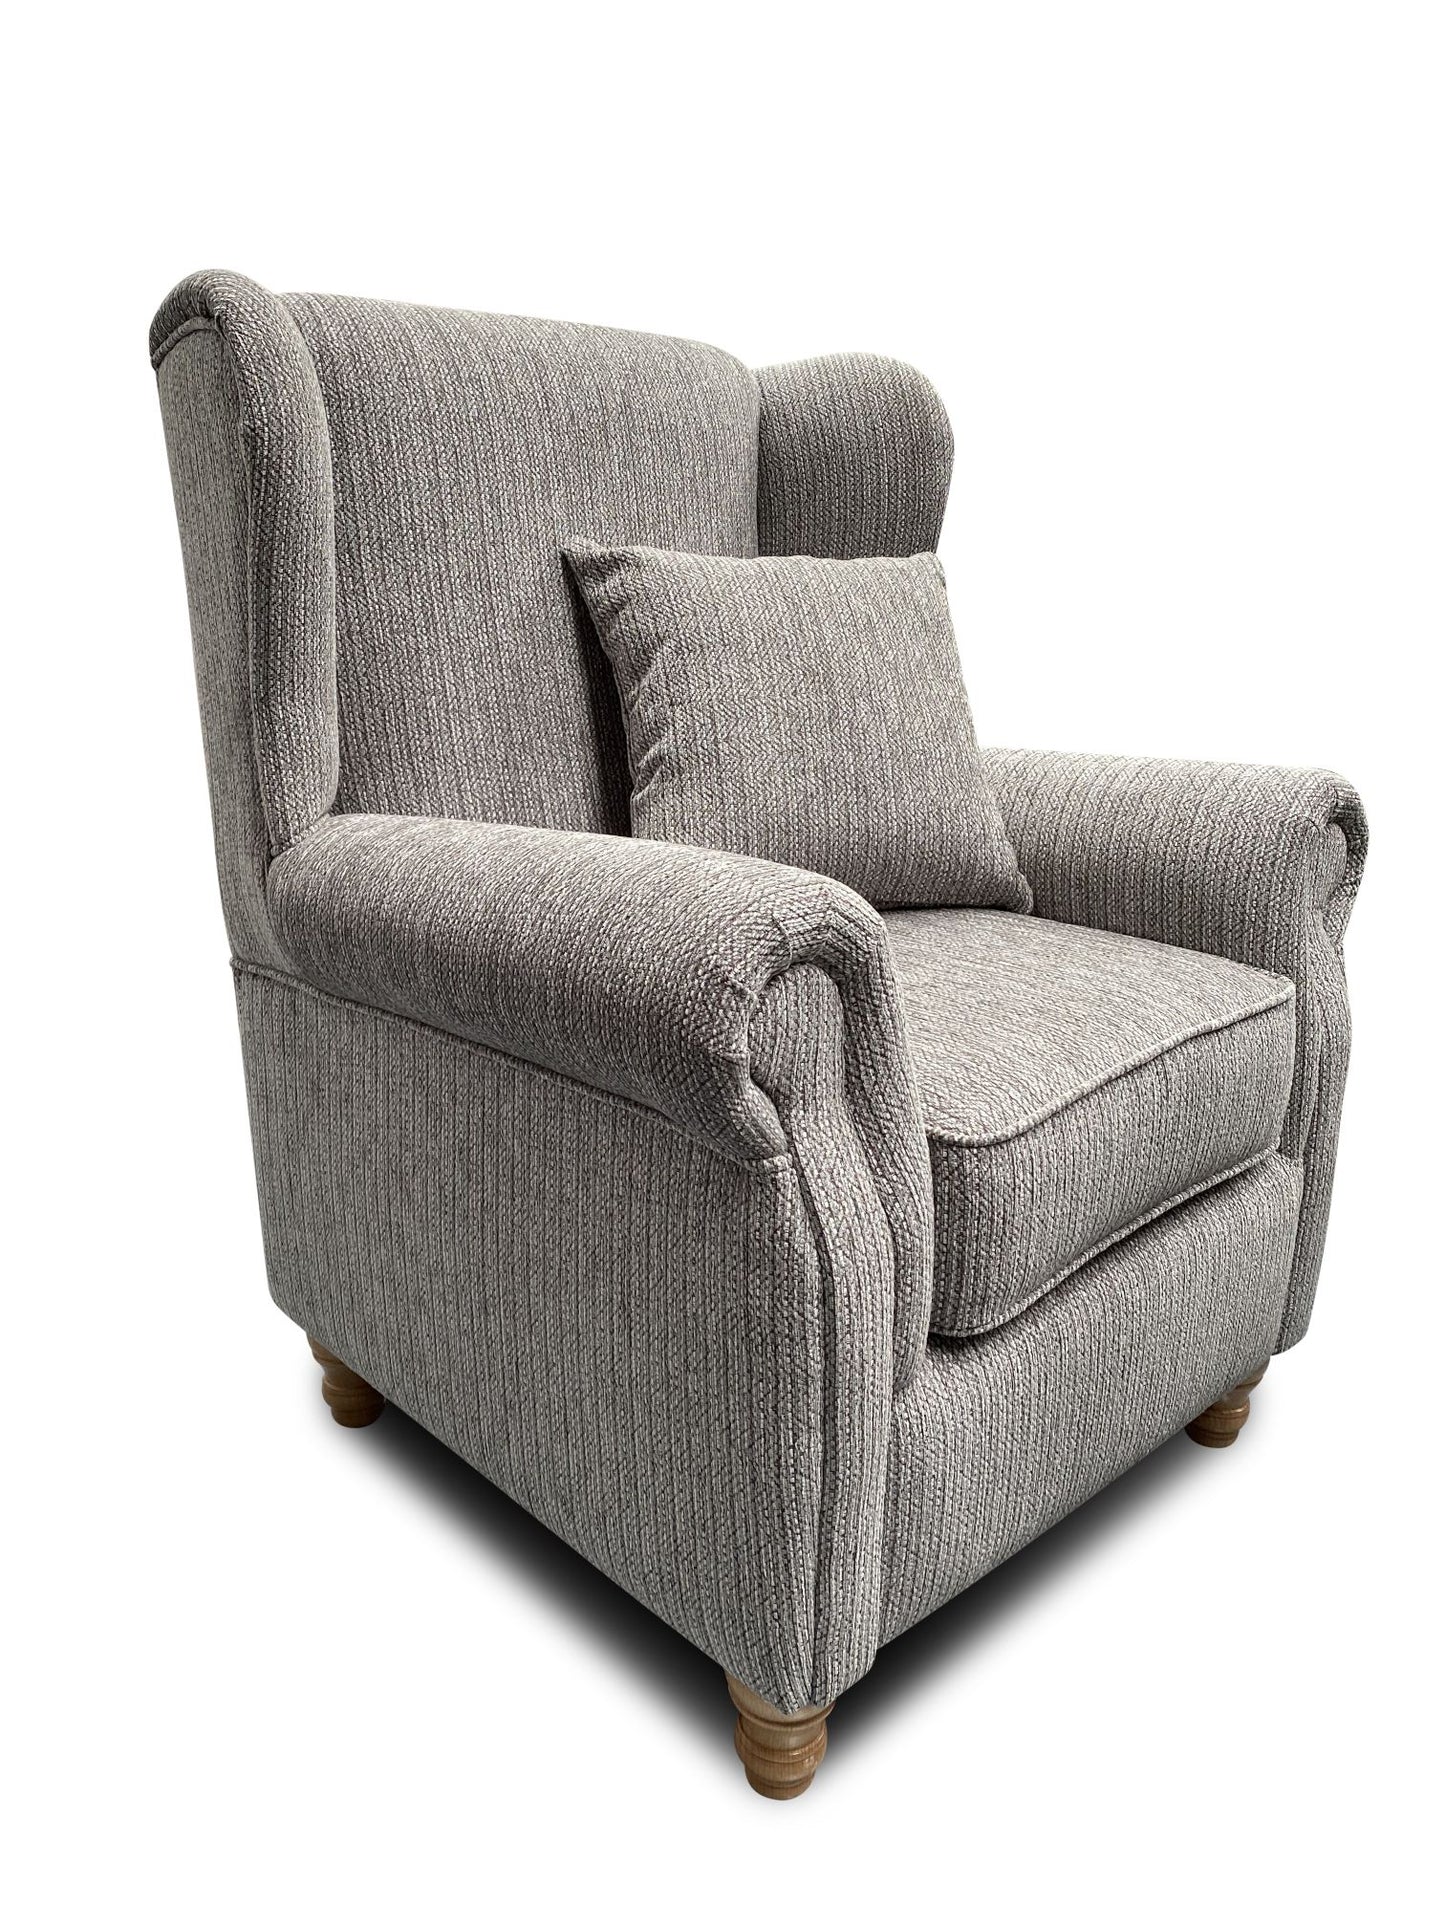 Bentley Debbie High Back Chair Chairs- KC Sofas